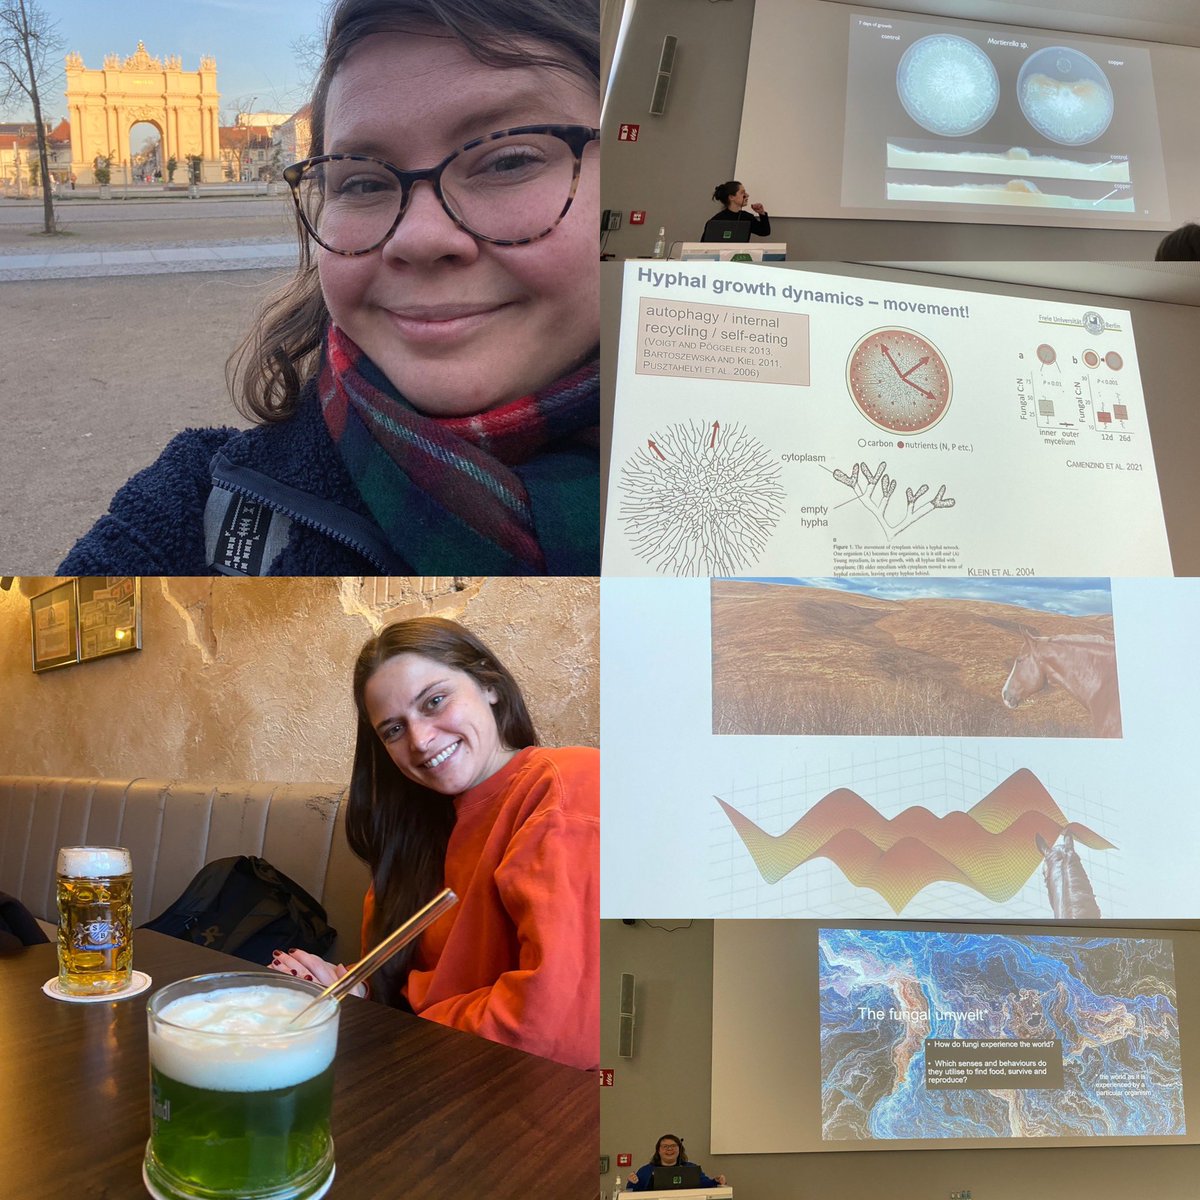 Time to leave Potsdam after an inspiring @bio_move conference where I was so nicely hosted by @Neumann_Ca and @mrillig lab. Also nice to finally meet @t_camenzind  and hear about her work. Lots of good ideas and encouraging comments to bring home.